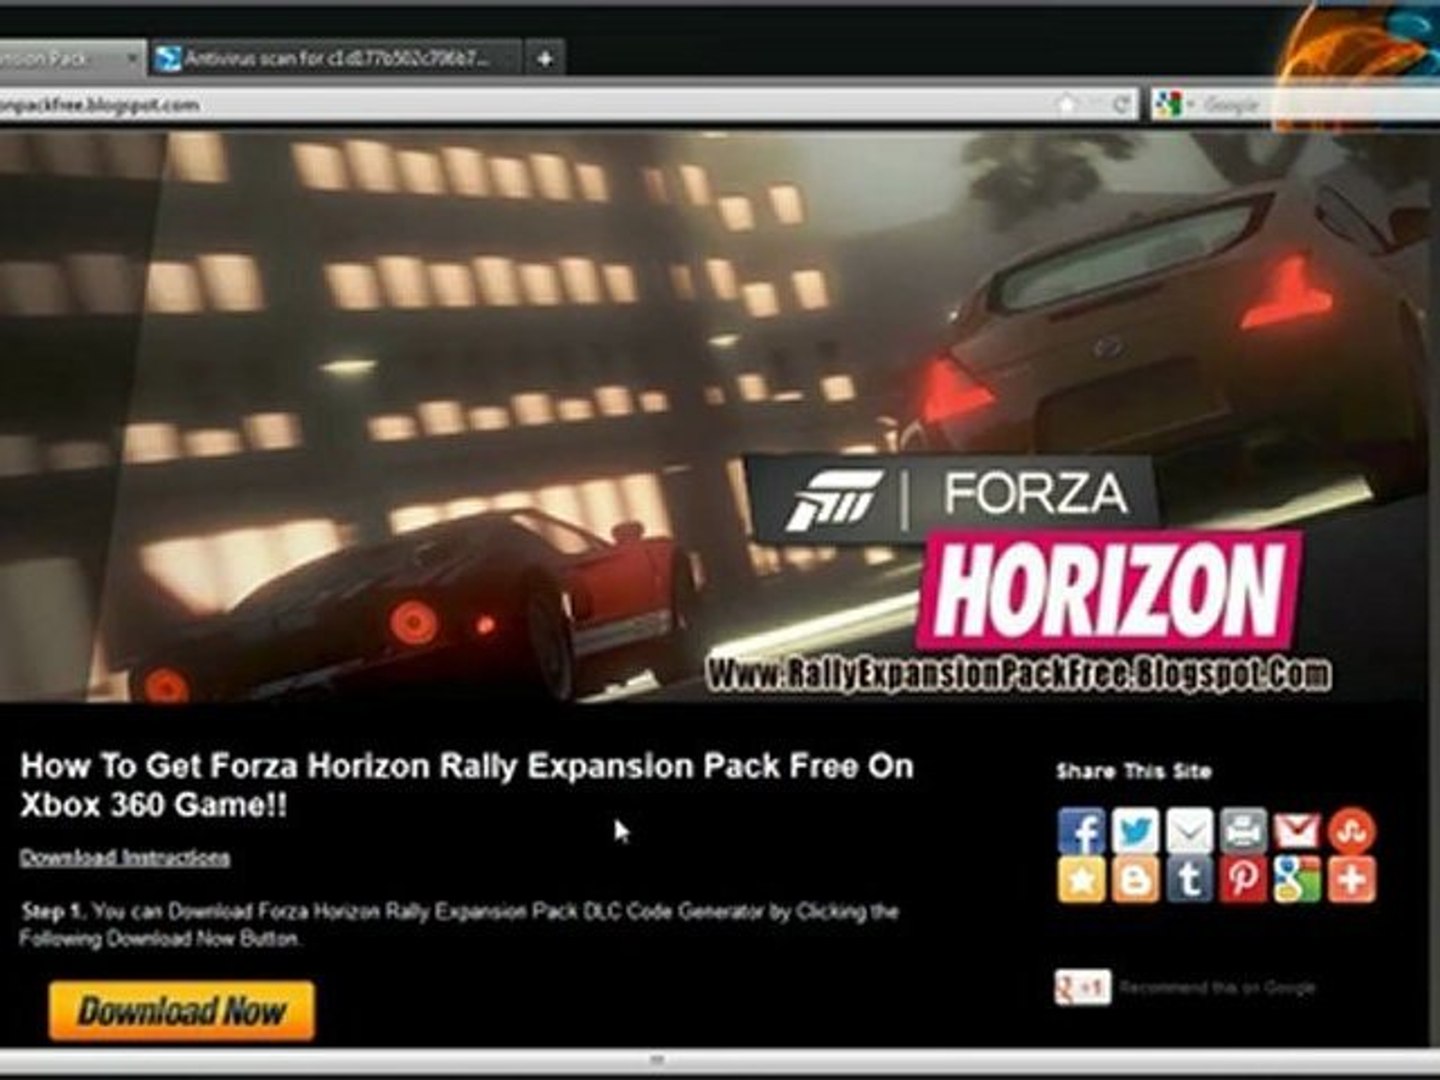 How to Get Forza Horizon Rally Expansion Pack DLC Free - video Dailymotion